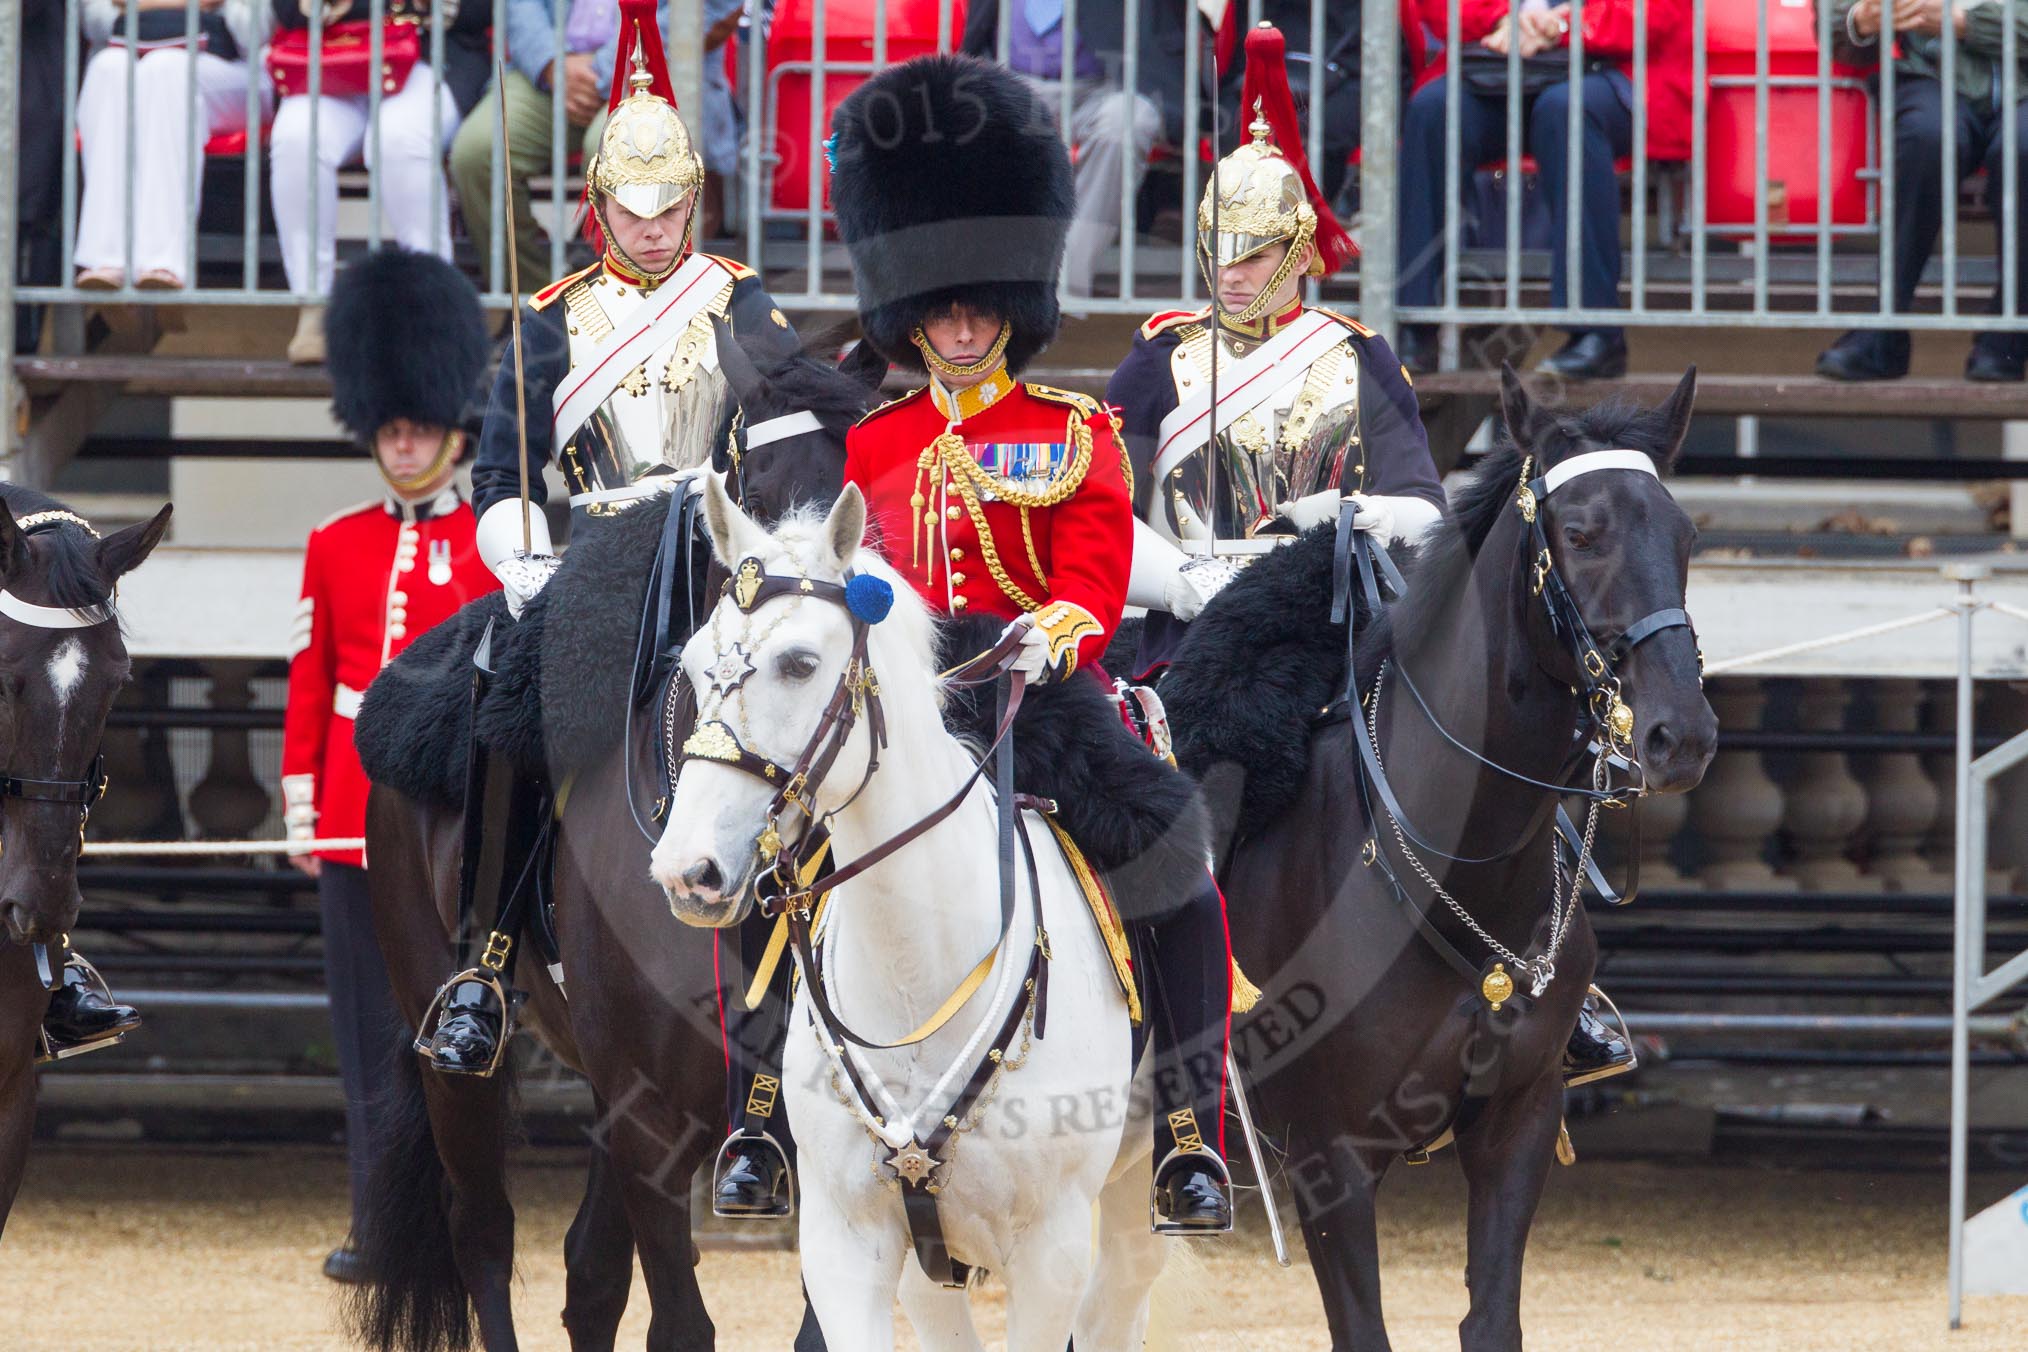 The Colonel's Review 2016.
Horse Guards Parade, Westminster,
London,

United Kingdom,
on 04 June 2016 at 10:56, image #146